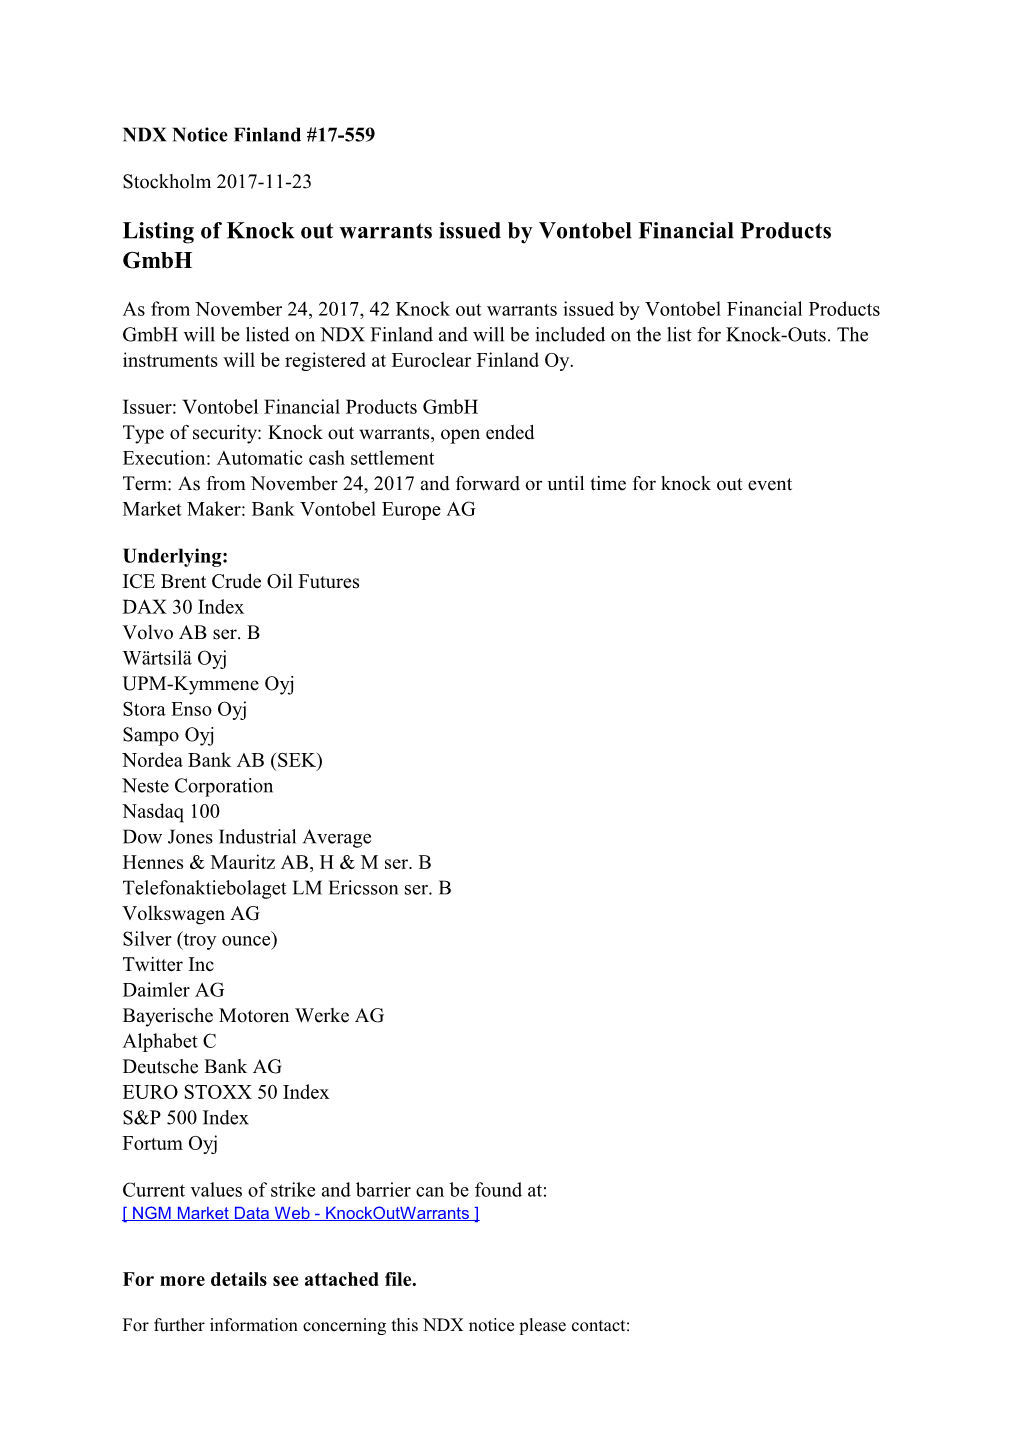 Listing of Knock out Warrants Issued by Vontobel Financial Products Gmbh